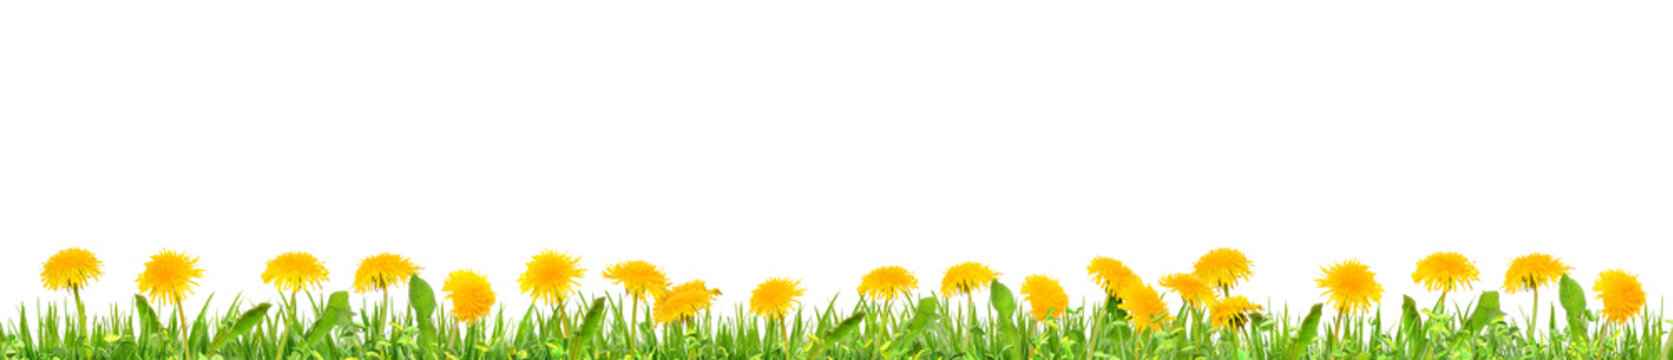 green grass and wild dandelions flowers on isolated background